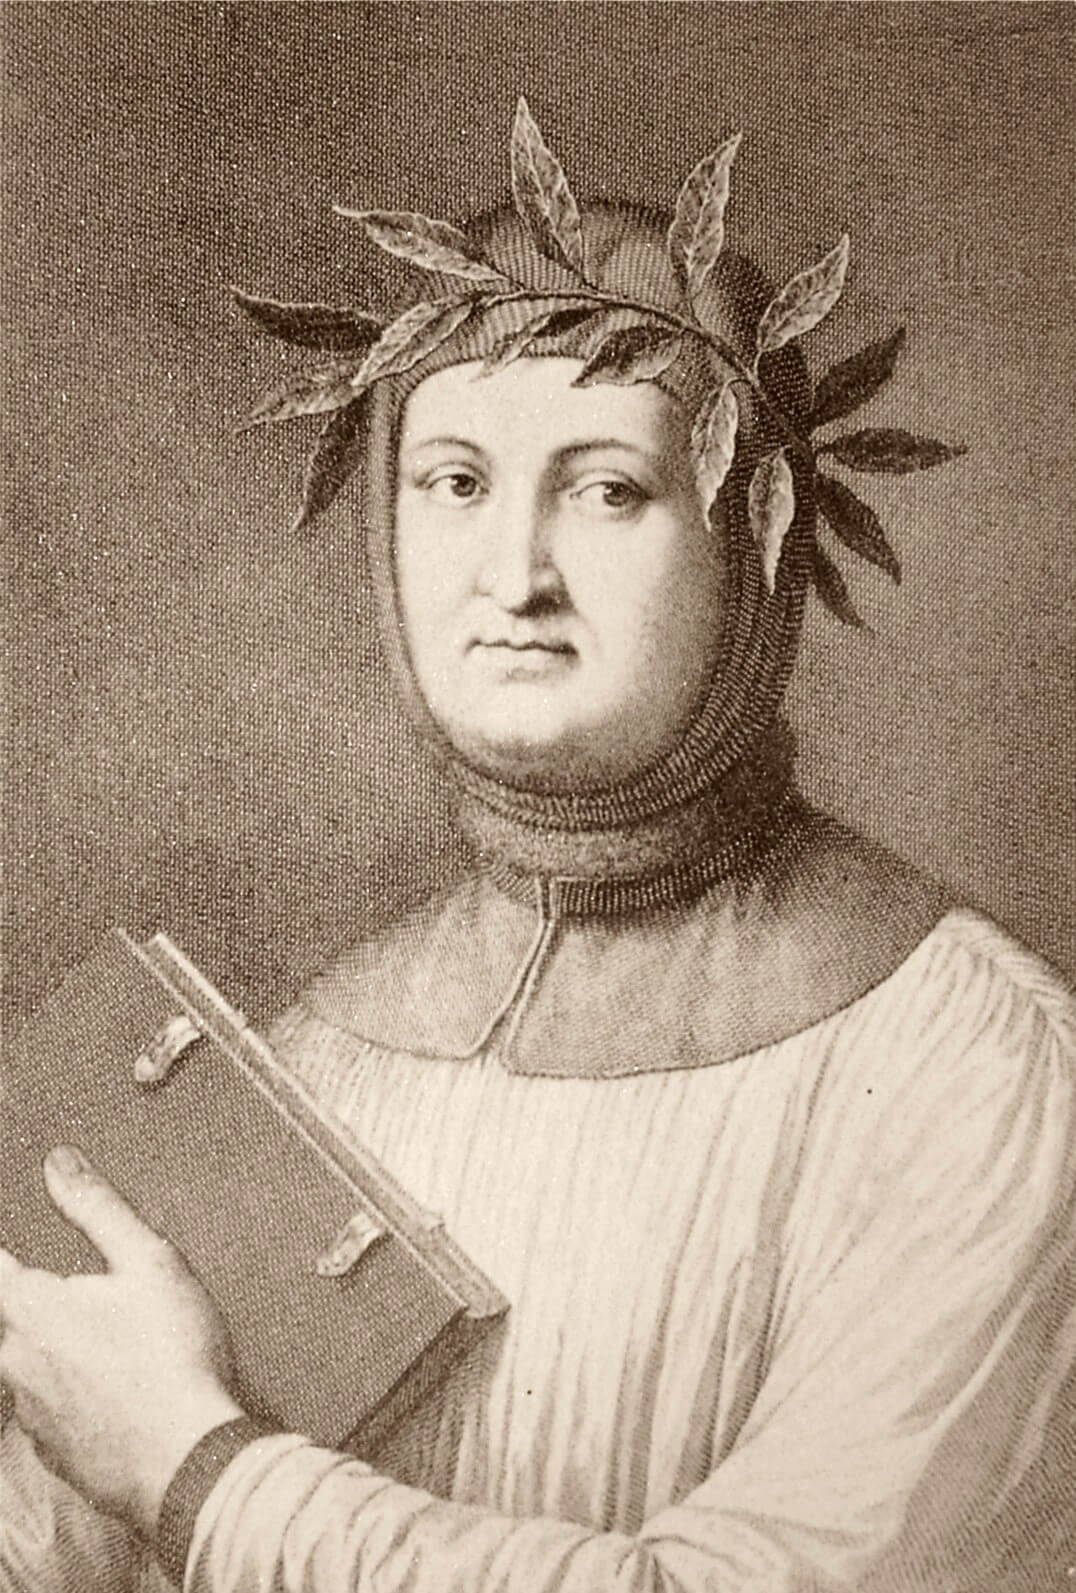 What is a sonnet The Petrarchan sonnet is named after Francesco Petrarca